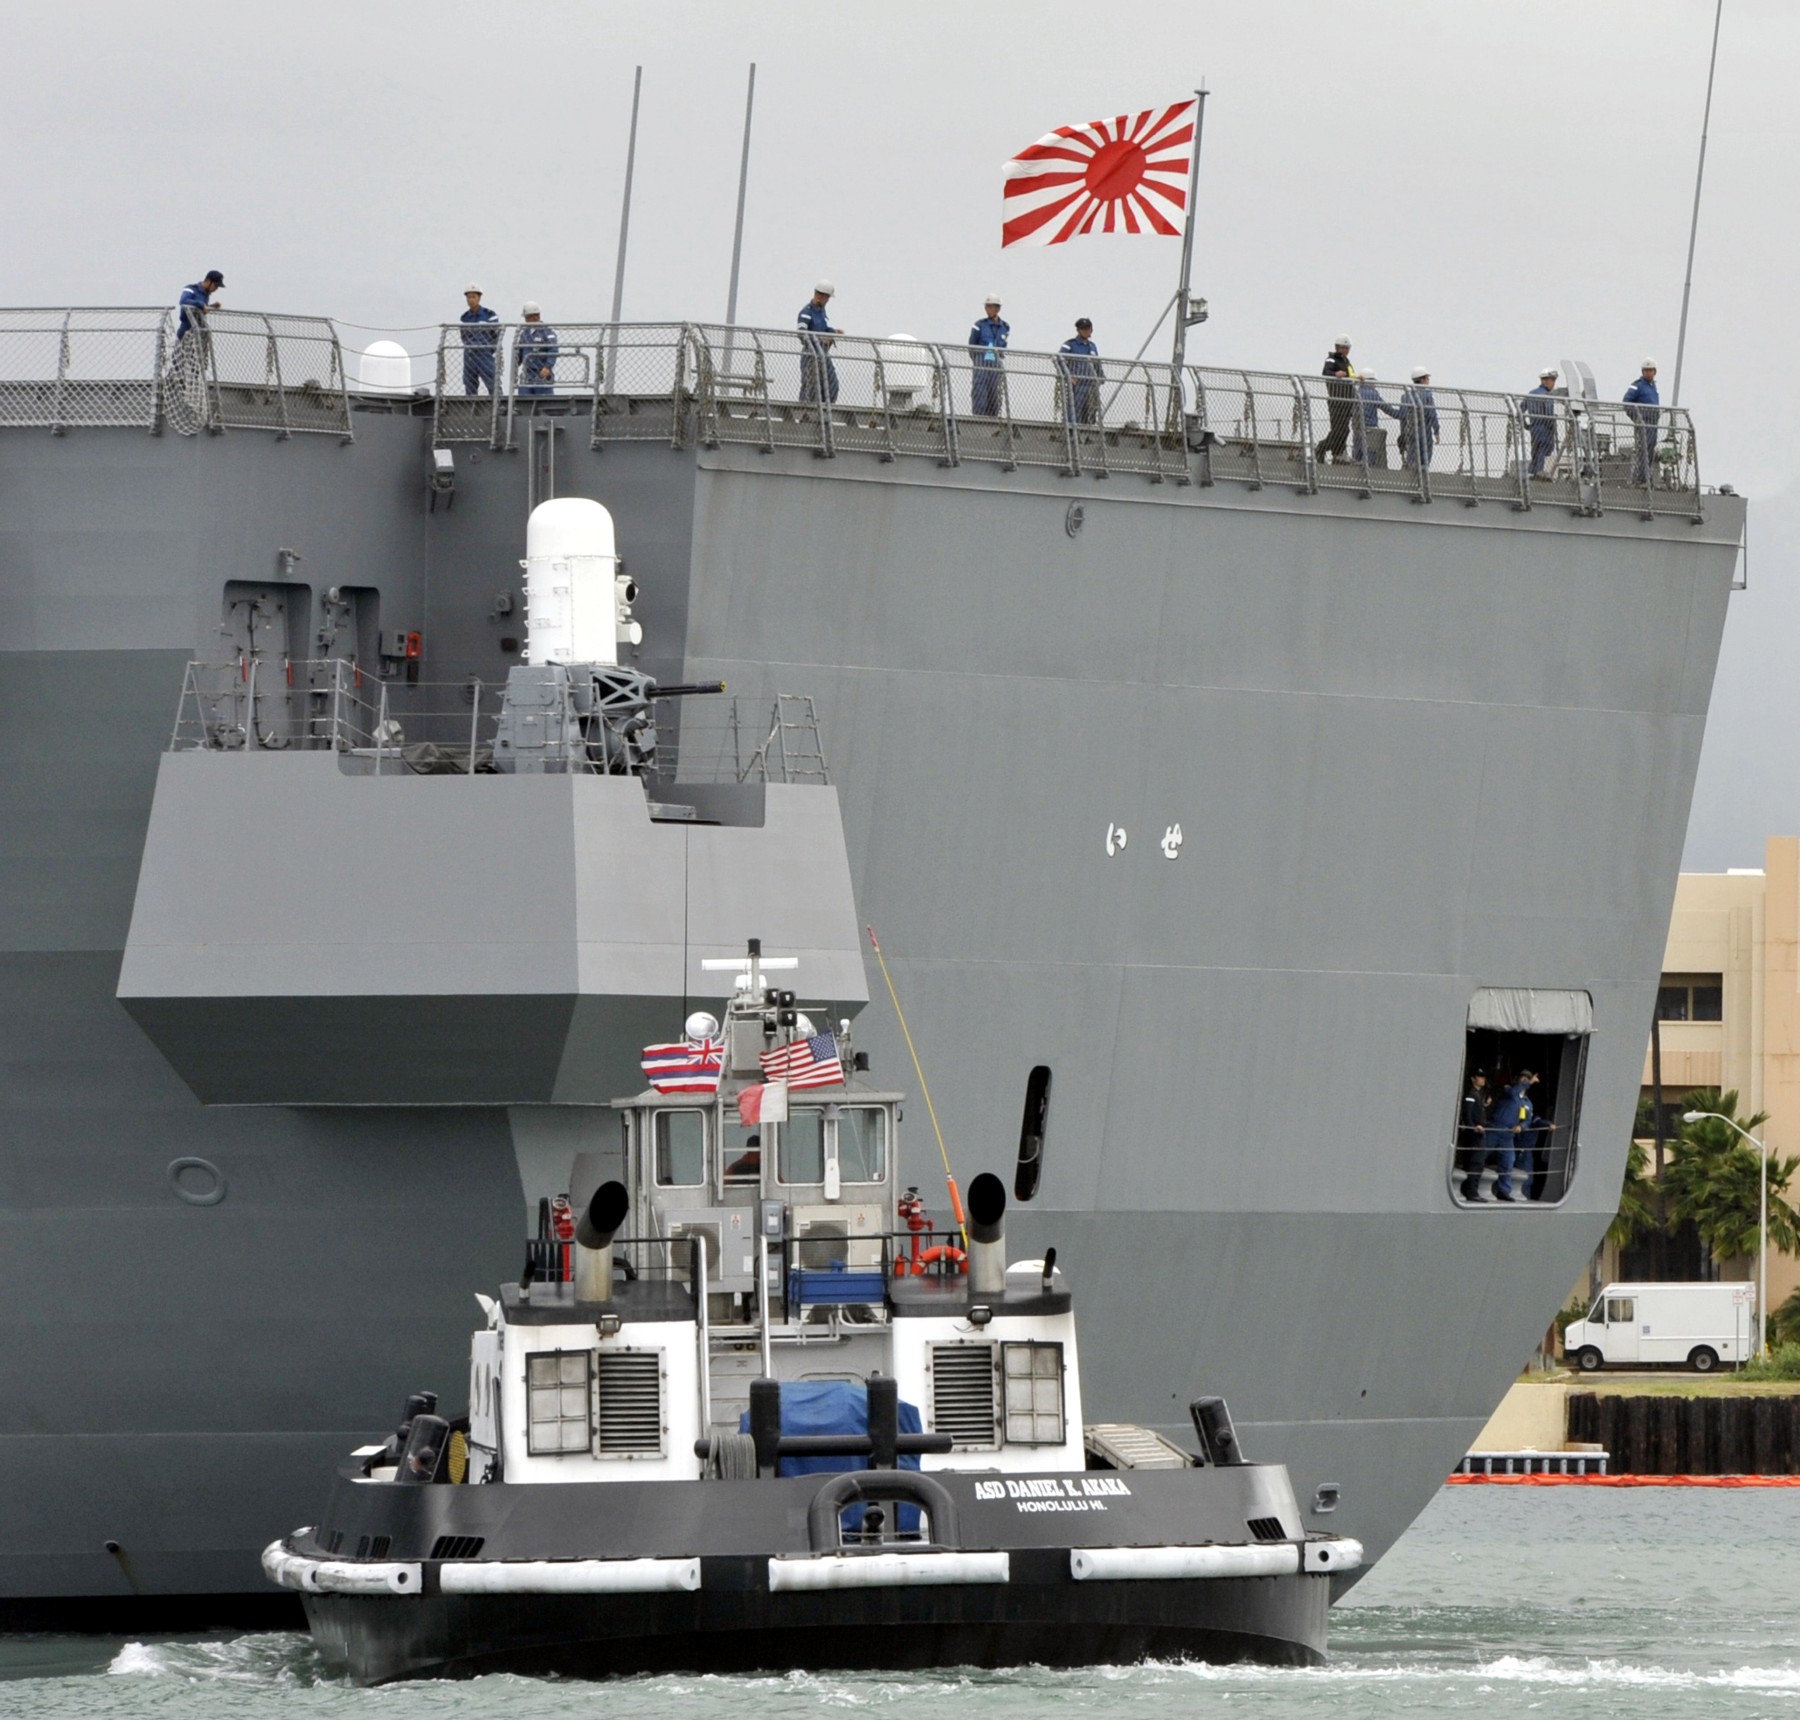 ddh-182 jds ise hyuga class helicopter destroyer japan maritime self defense force jmsdf 38